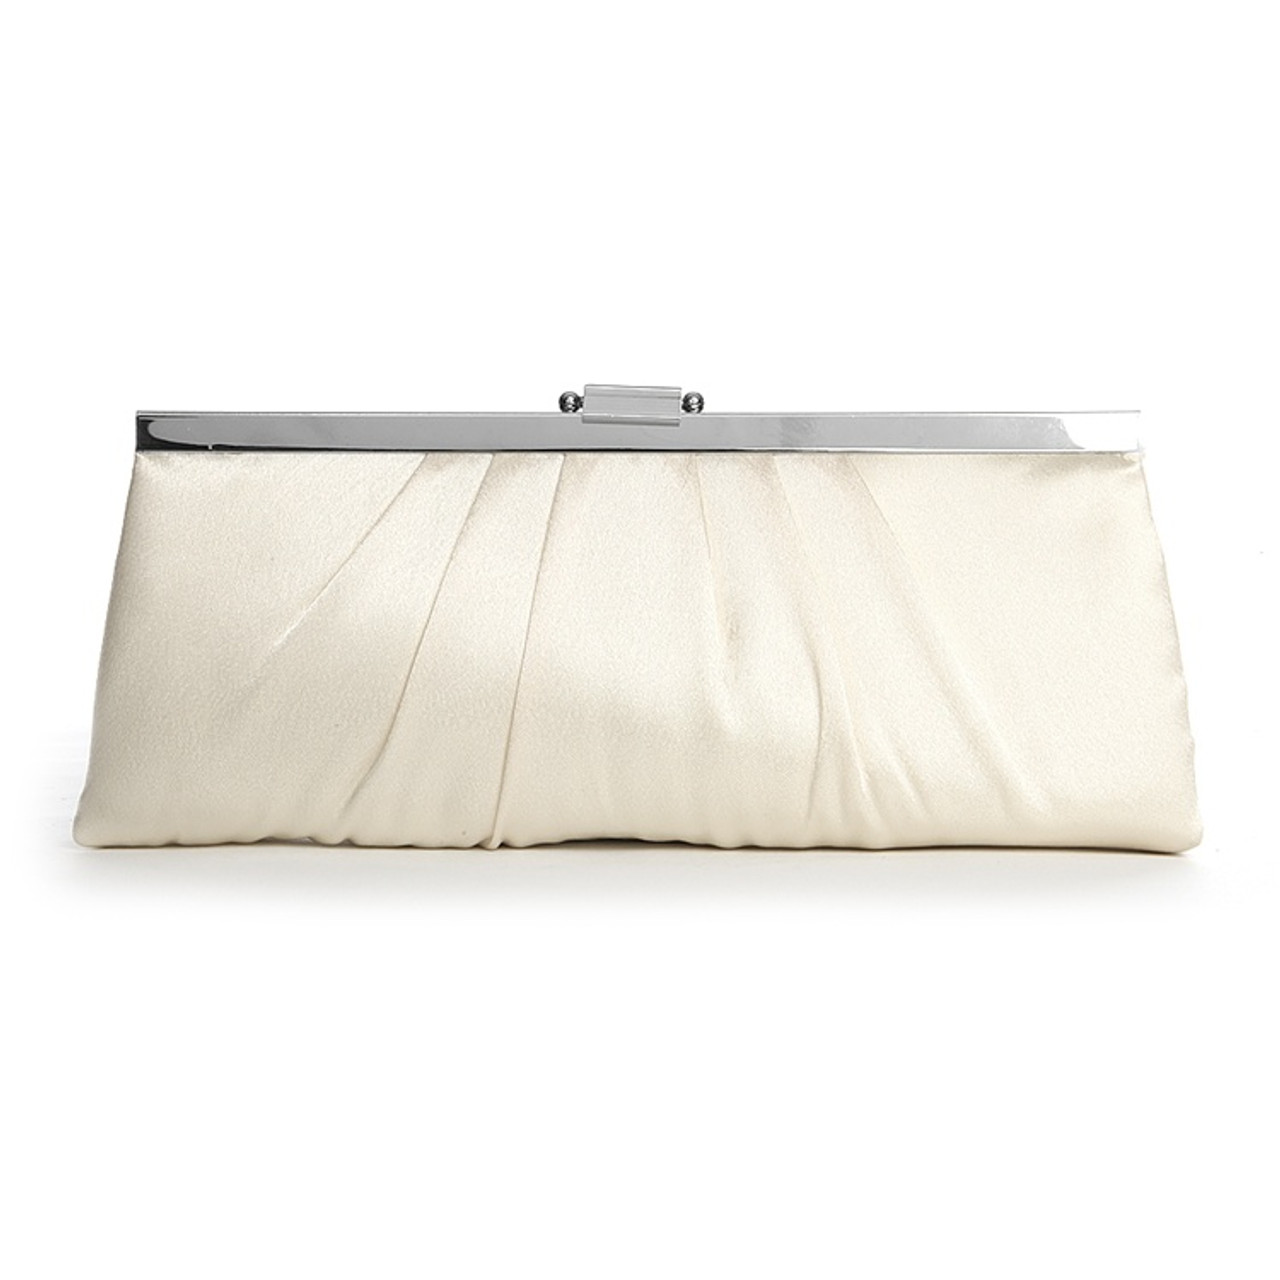 27 Best Bridal Clutch Bags for Fashionable Brides | Glamour UK